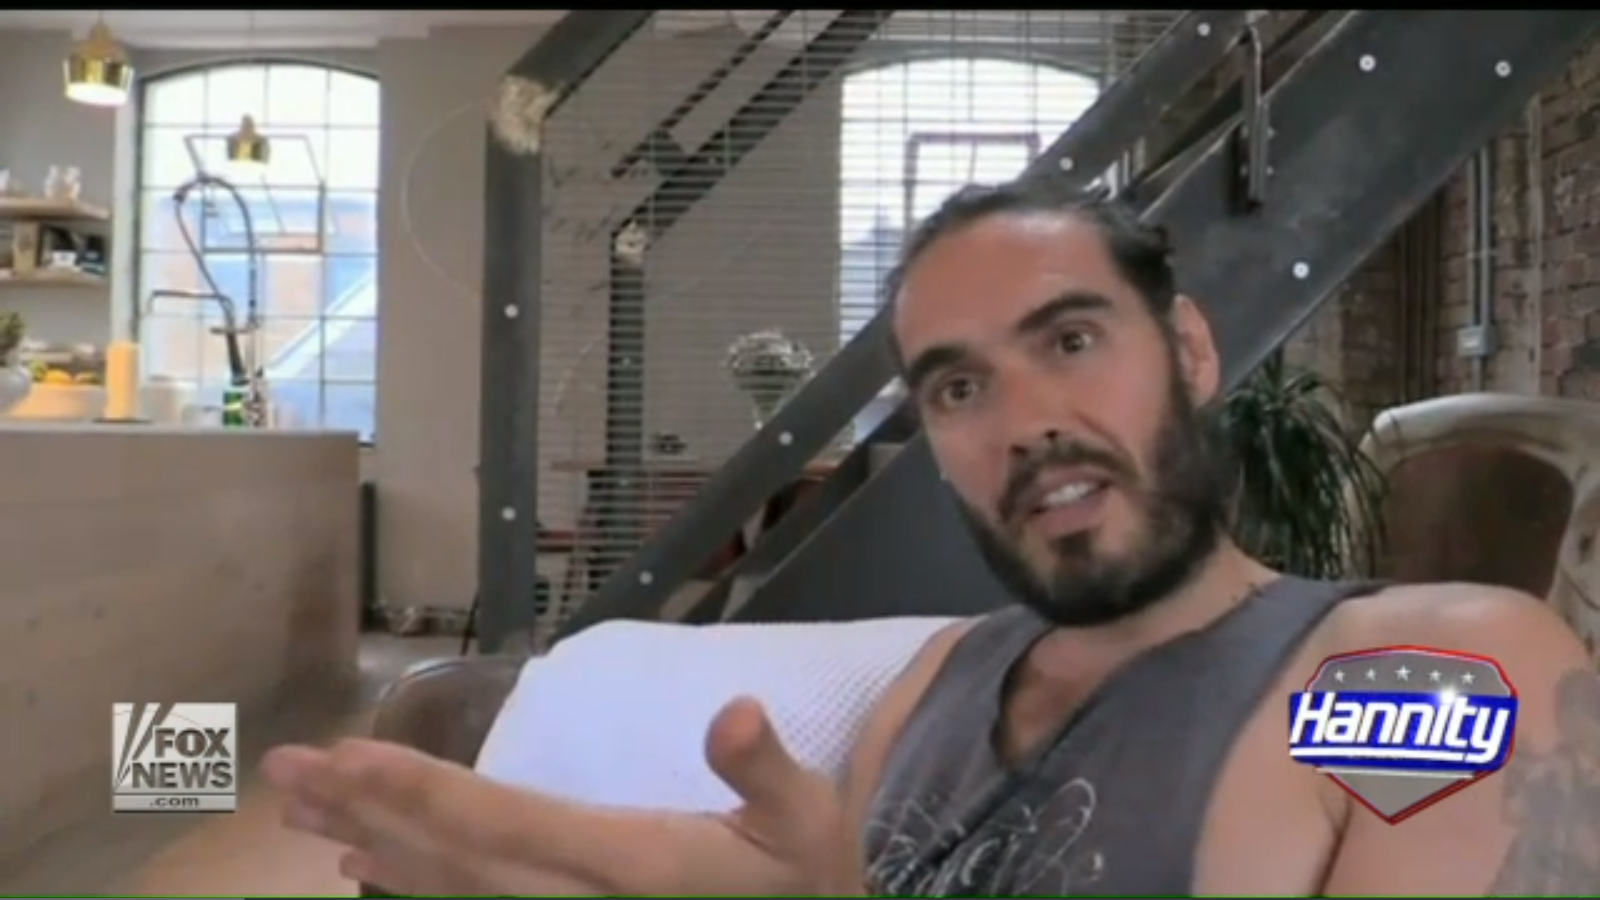 Russell Brand Owns FOX Over Gaza Crisis